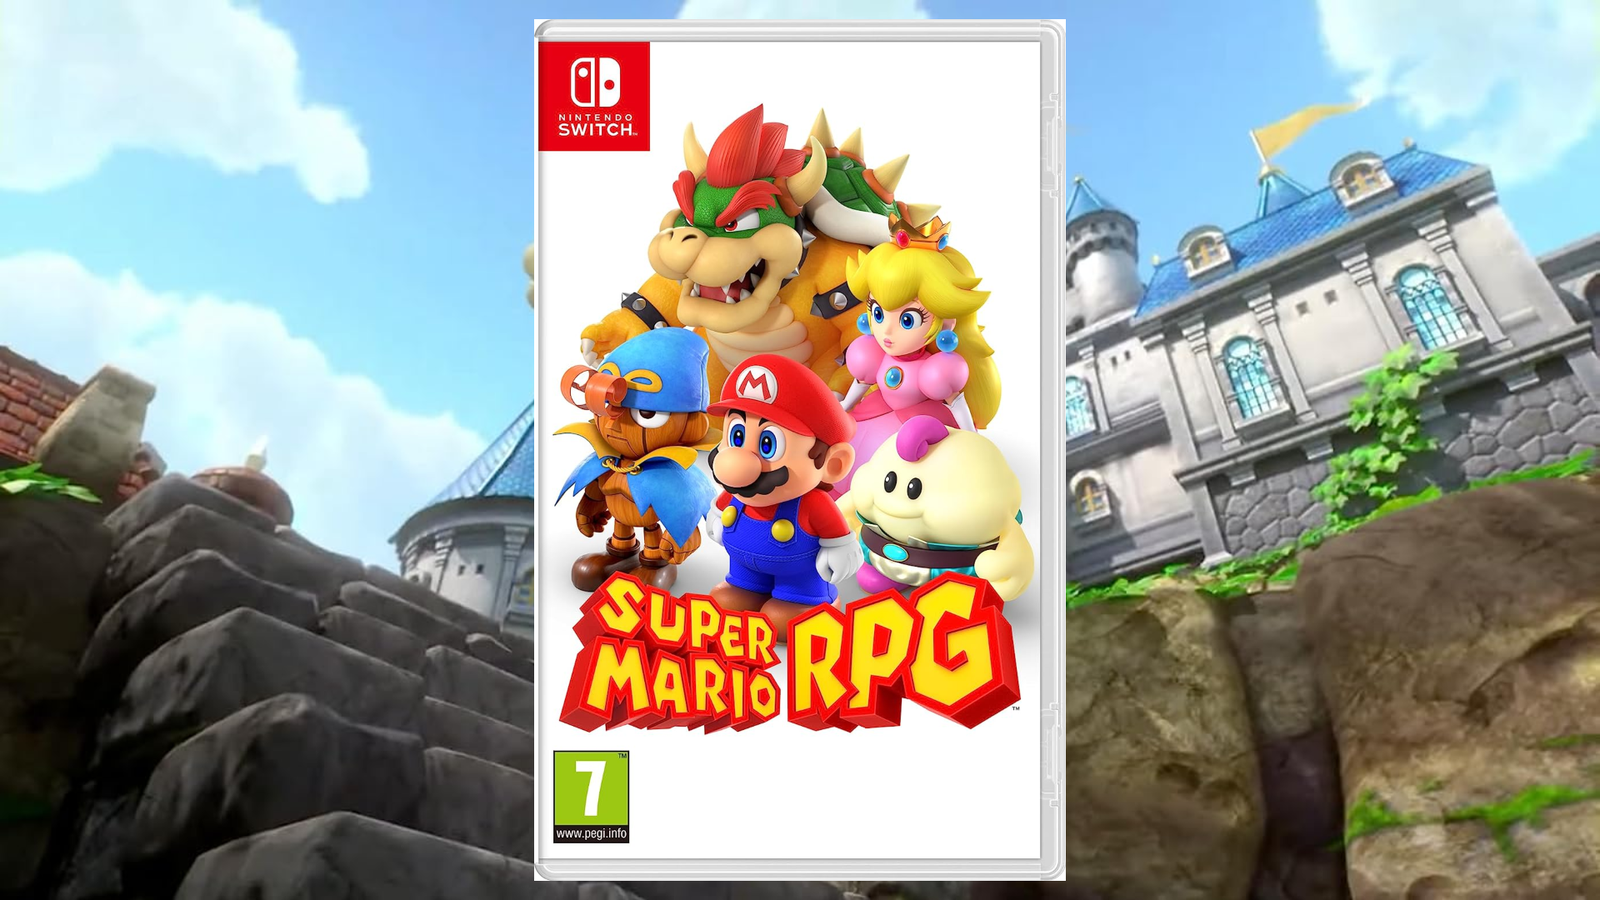 https://assetsio.reedpopcdn.com/Super-Mario-RPG-pre-orders-Nintendo-Switch.png?width=1600&height=900&fit=crop&quality=100&format=png&enable=upscale&auto=webp